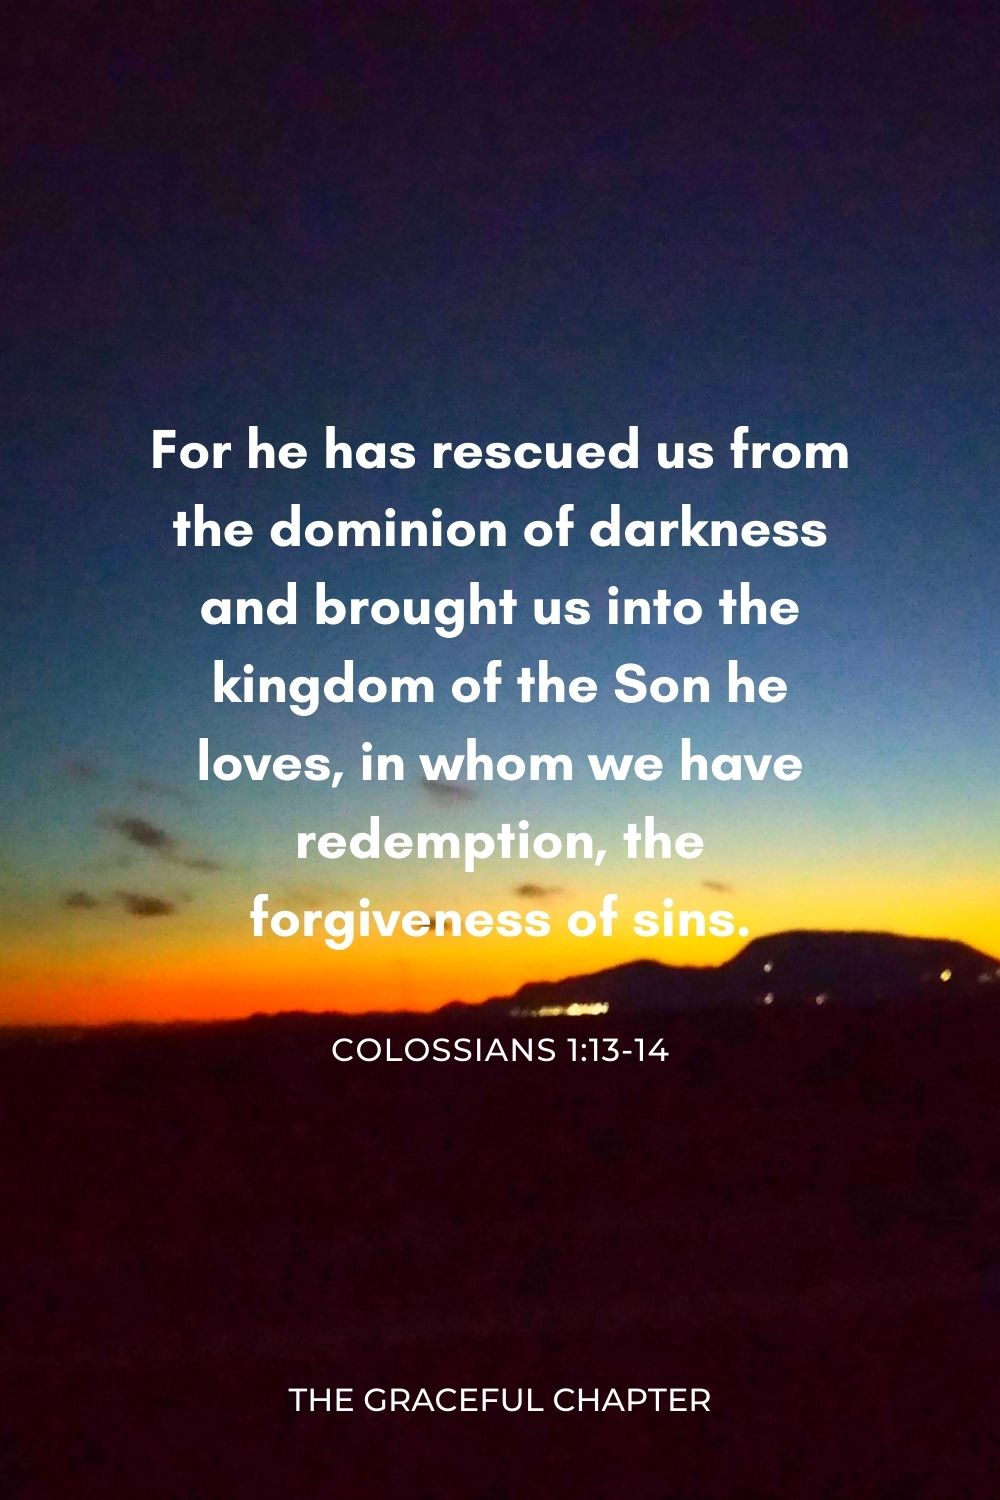 For he has rescued us from the dominion of darkness and brought us into the kingdom of the Son he loves, in whom we have redemption, the forgiveness of sins. Colossians 1:13-14